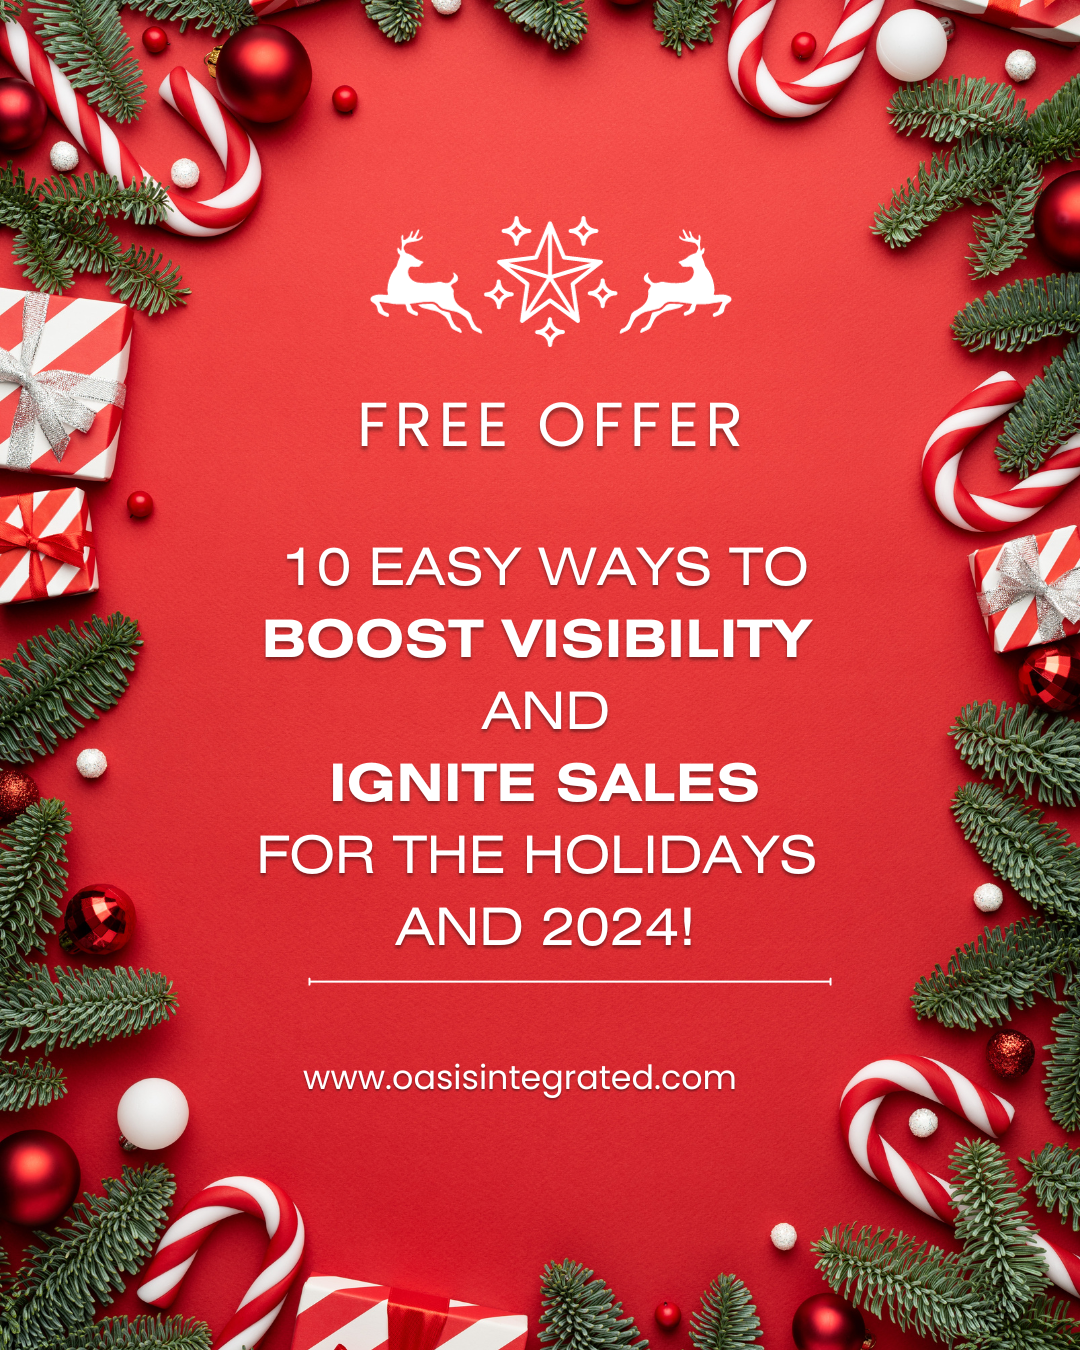 10 Easy Ways to Boost Visibility and Ignite Sales for the Holidays and 2024!